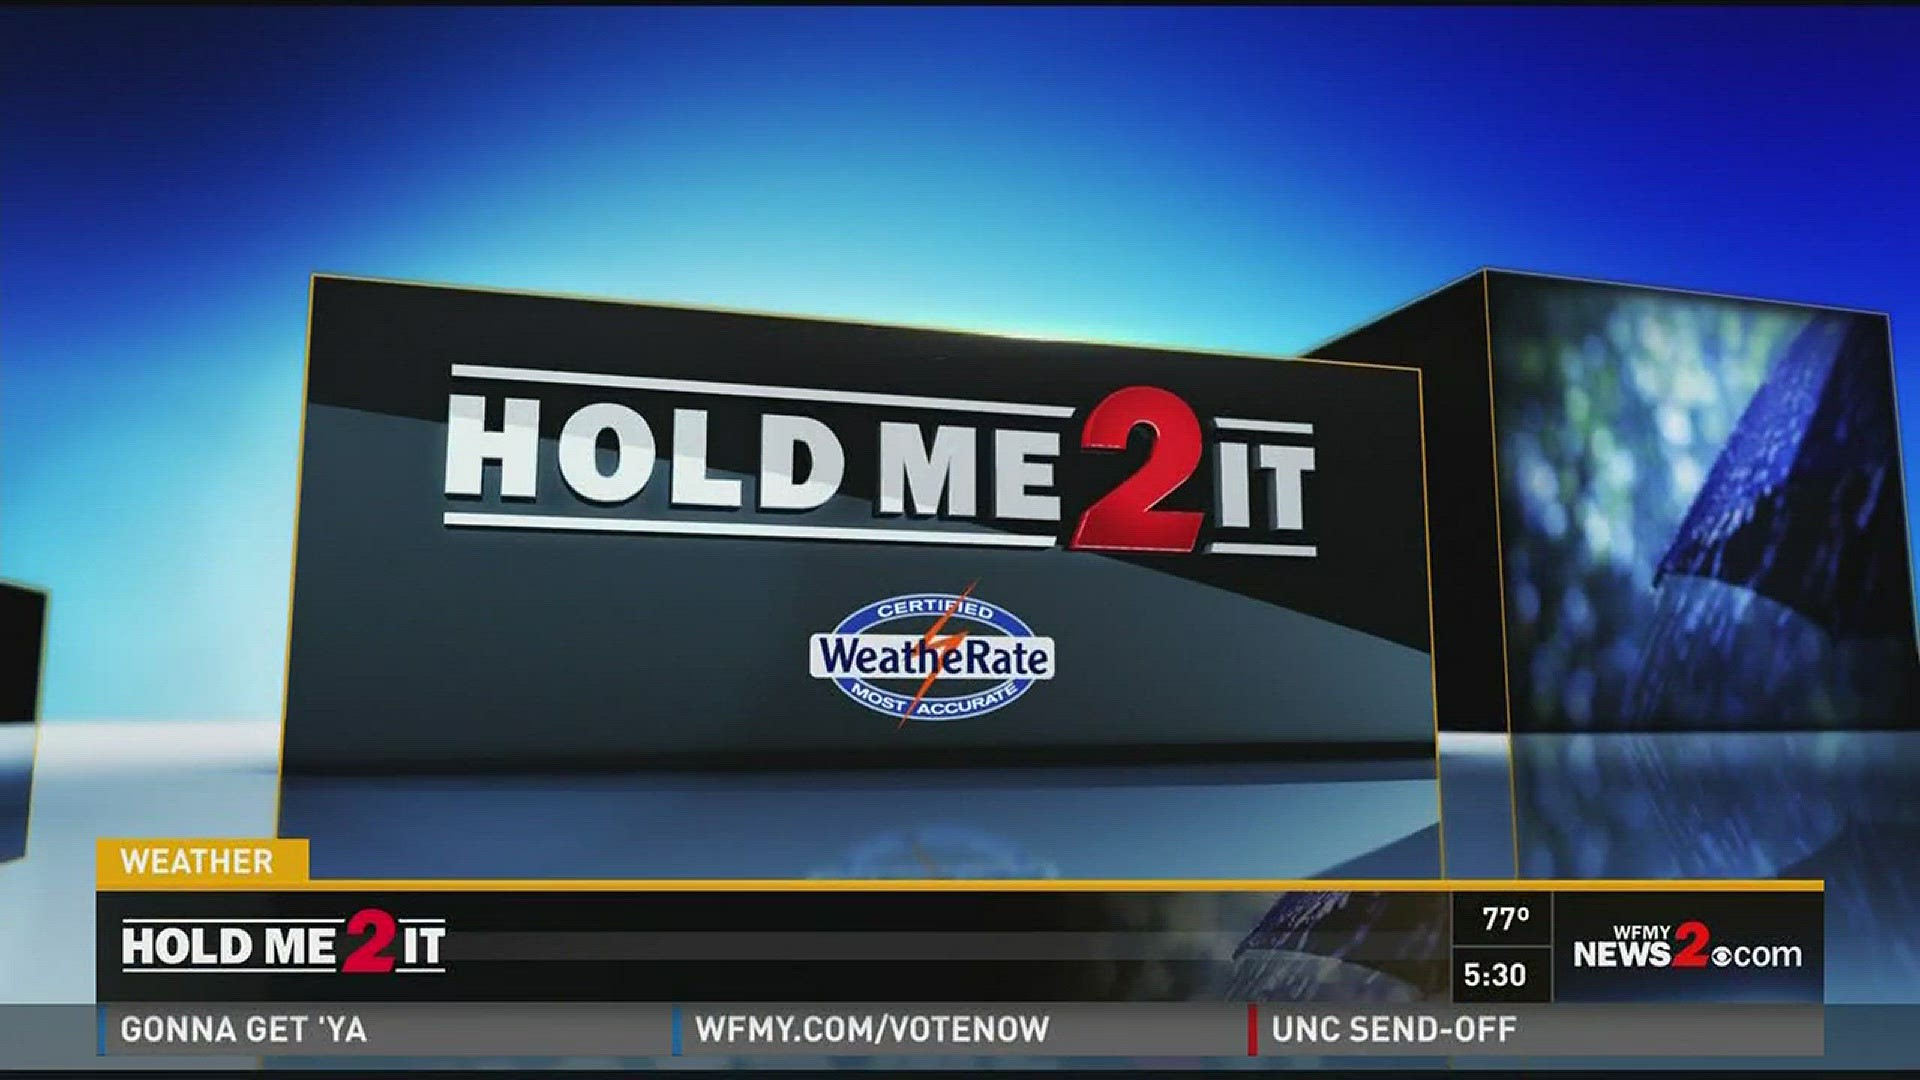 Hold Me 2 It Forecast: Tuesday March 28, 2017